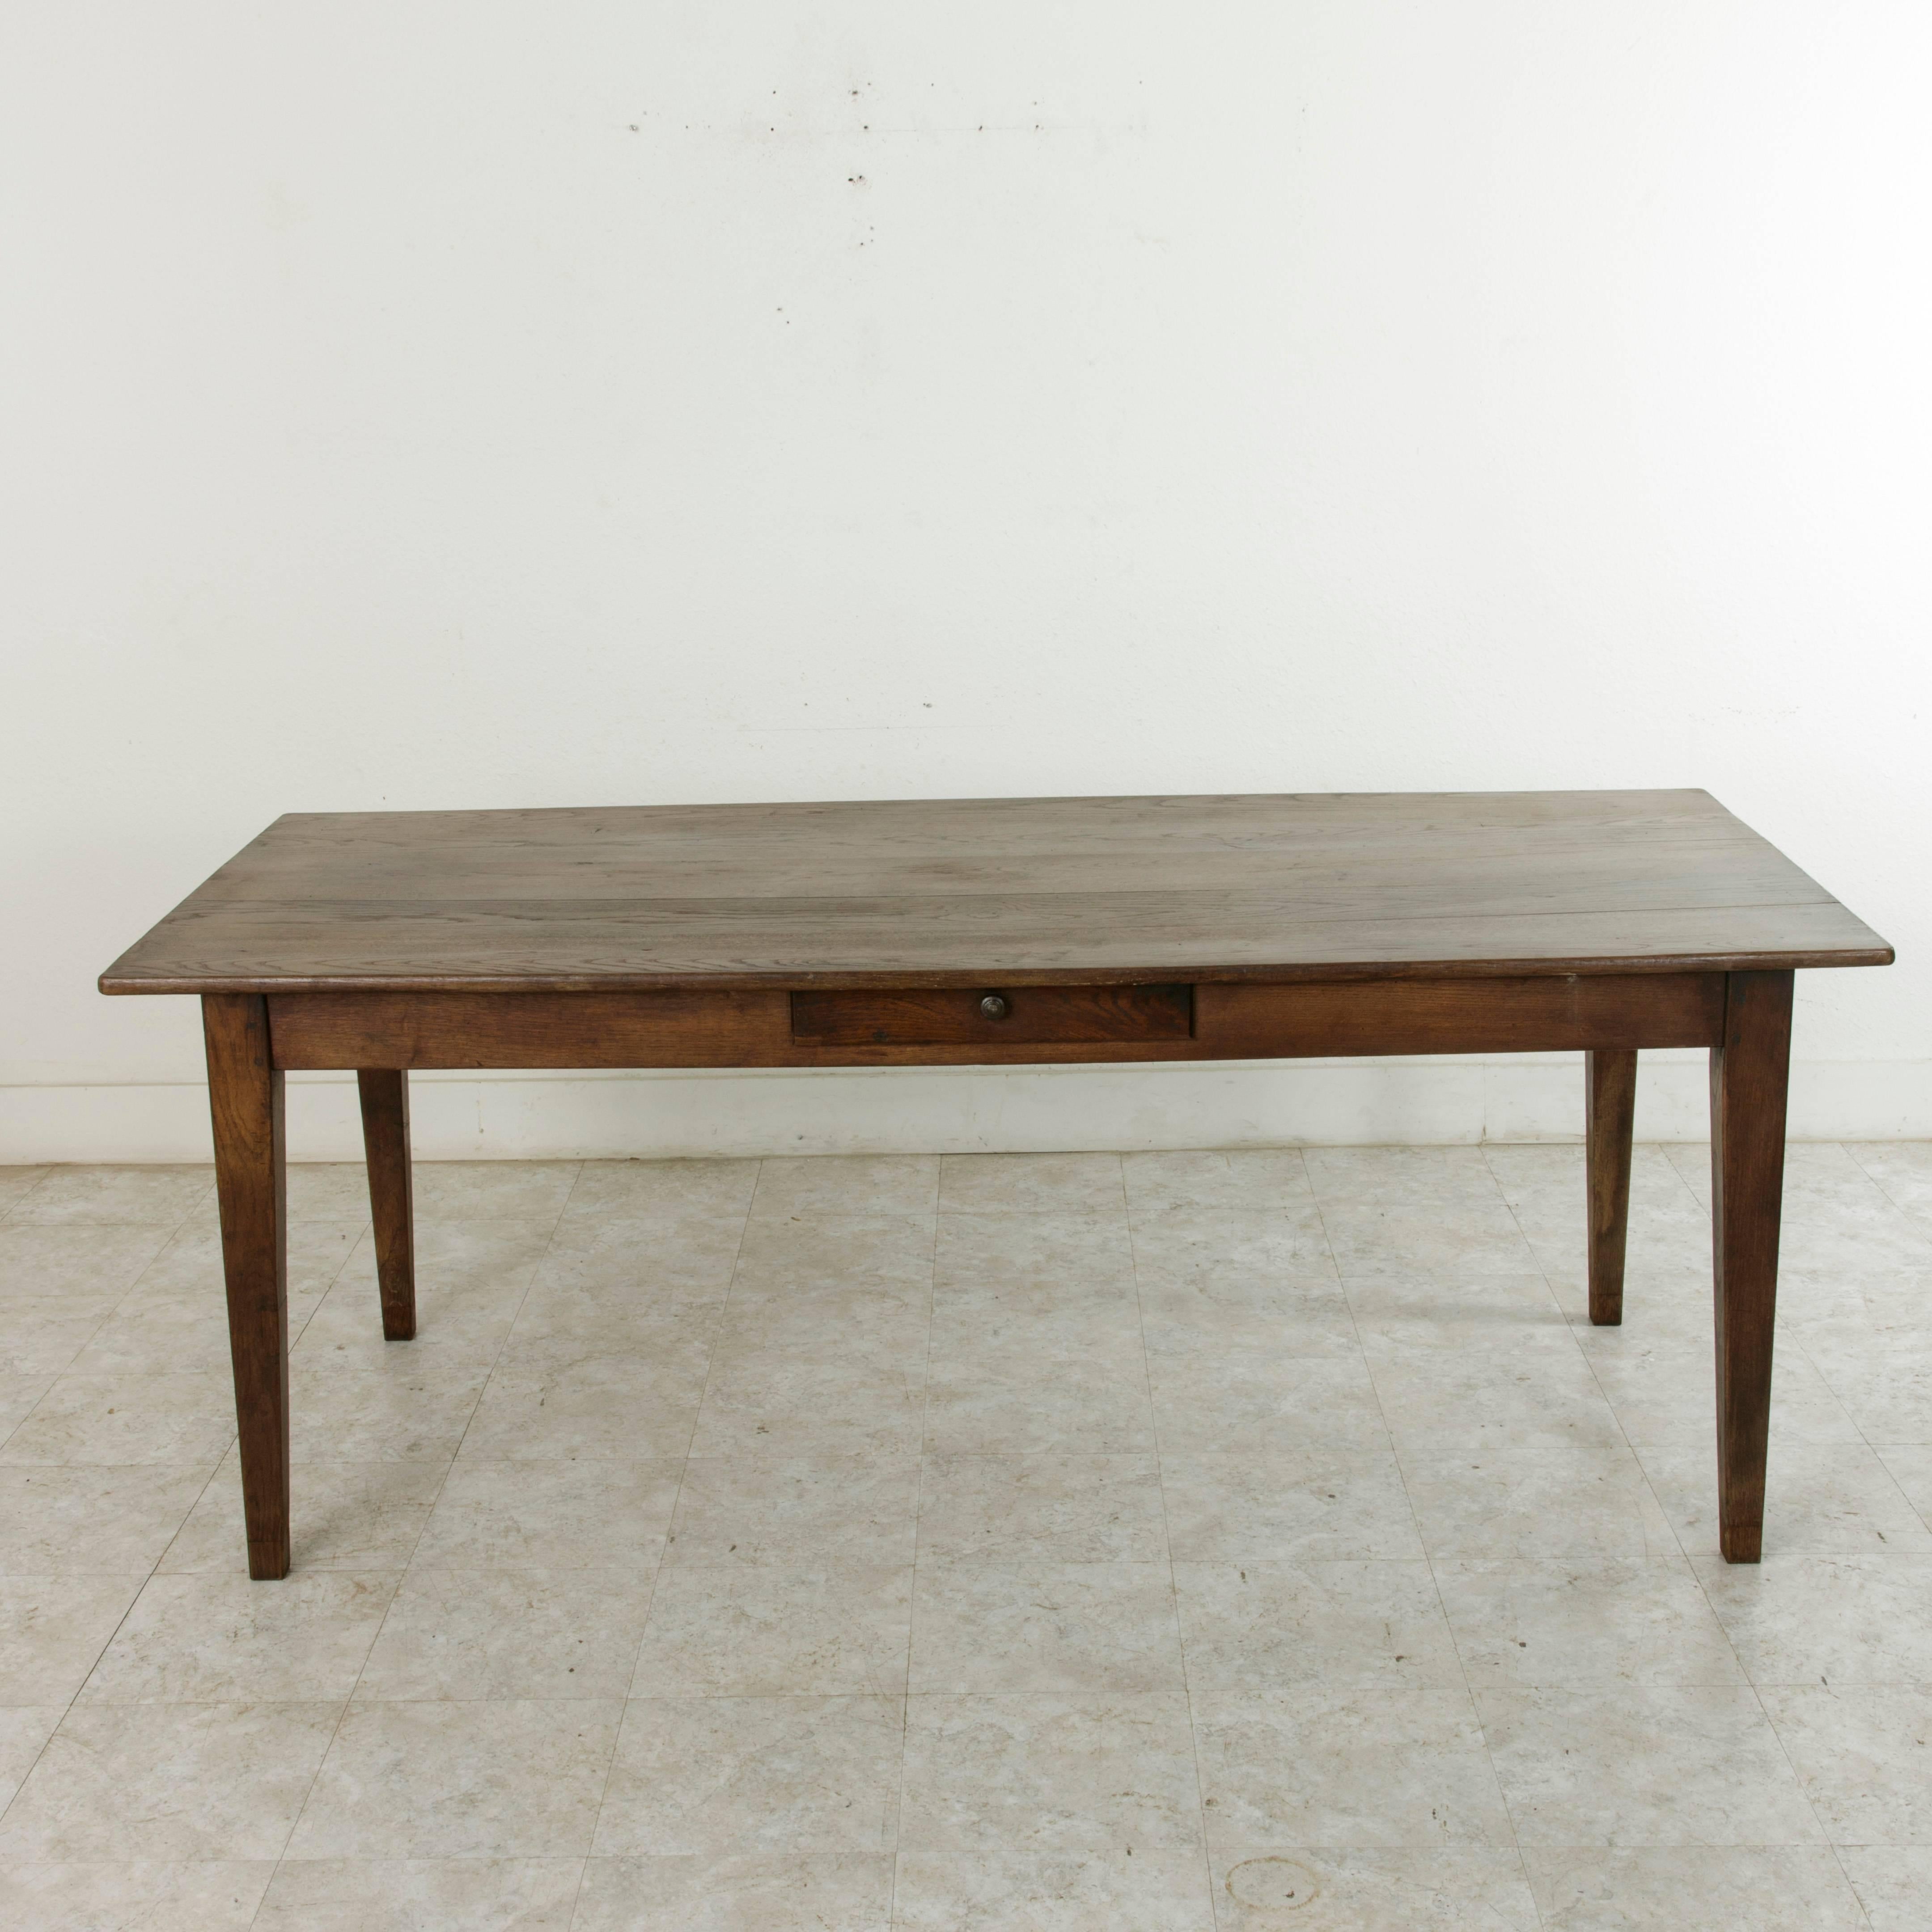 This handsome French oak farm table or dining table from the early twentieth century features a top constructed of five planks of wood resting on a hand pegged base with gently tapered legs. From the region of Le Perche, a Sub-region of Normandy,